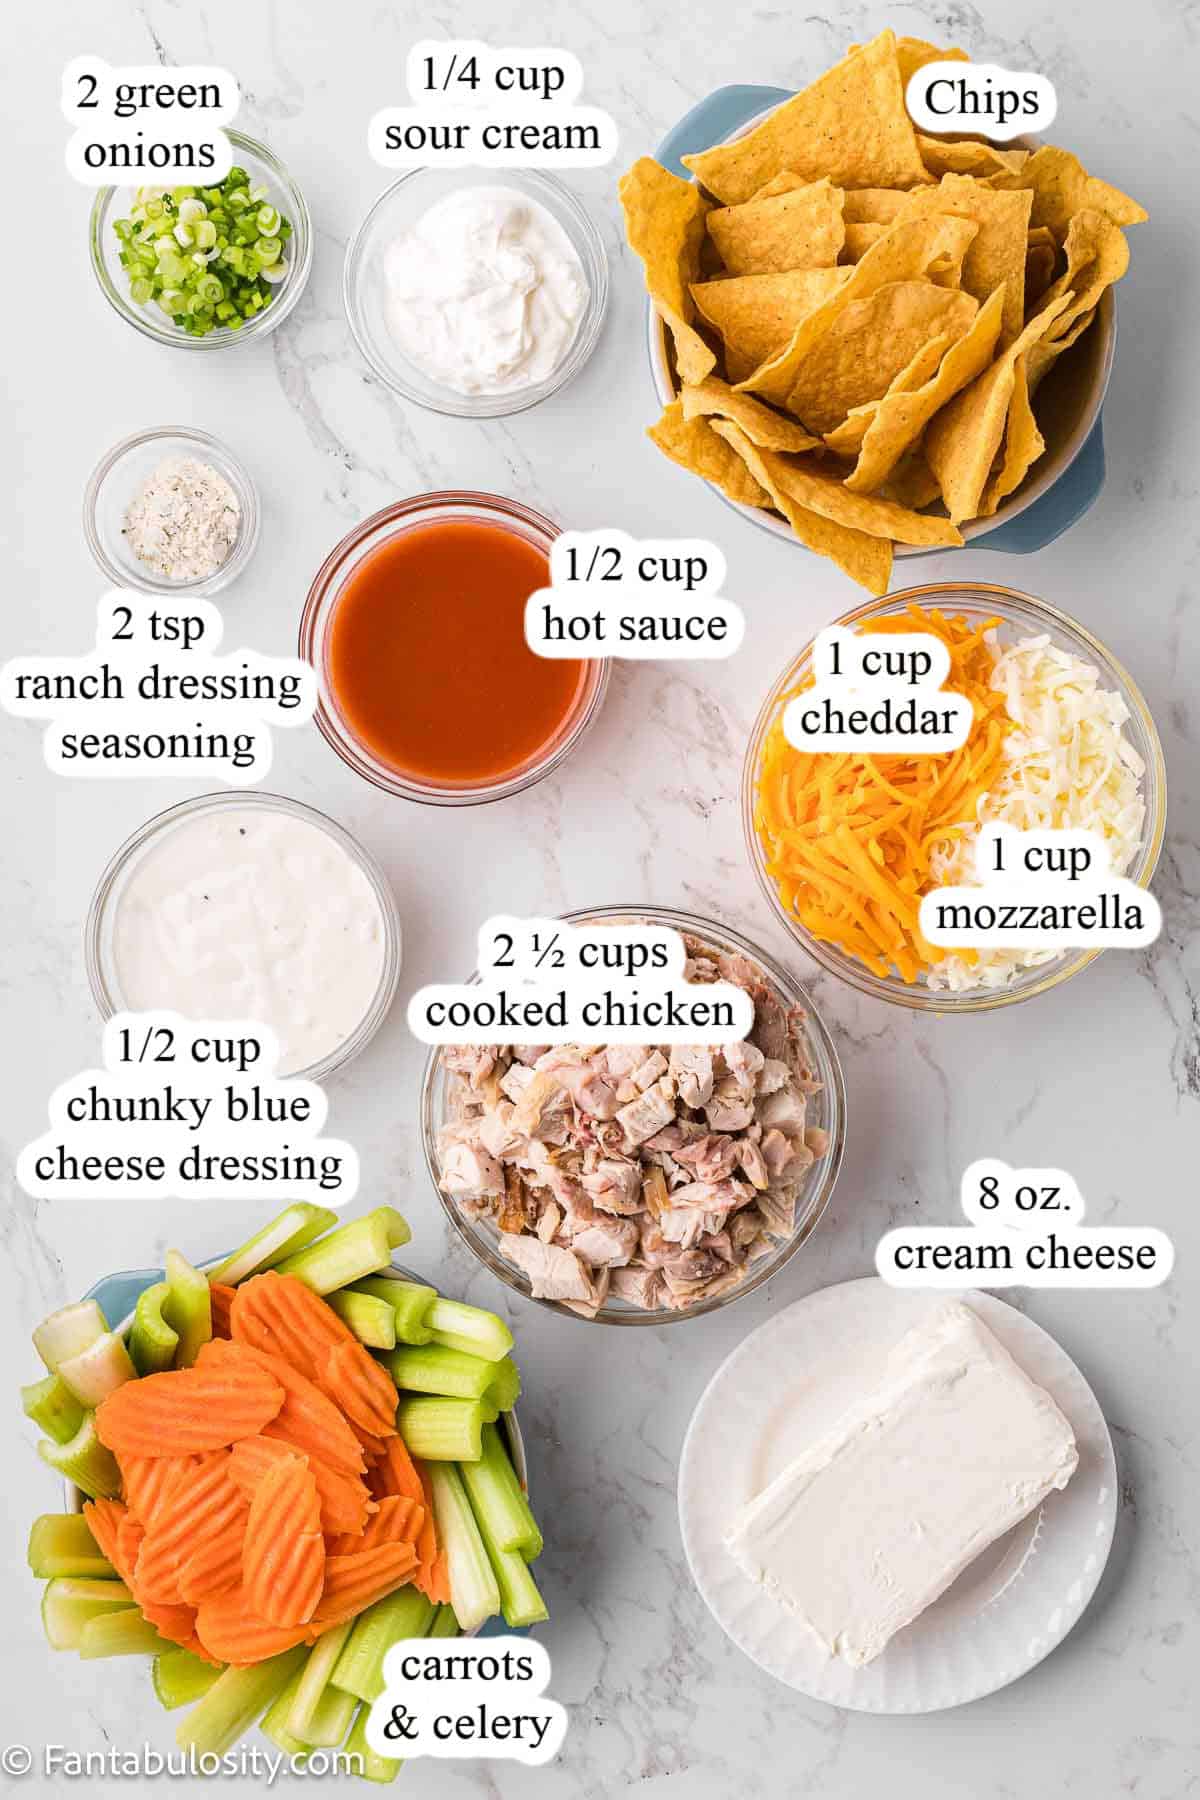 Labeled ingredients for a buffalo chicken dip recipe.